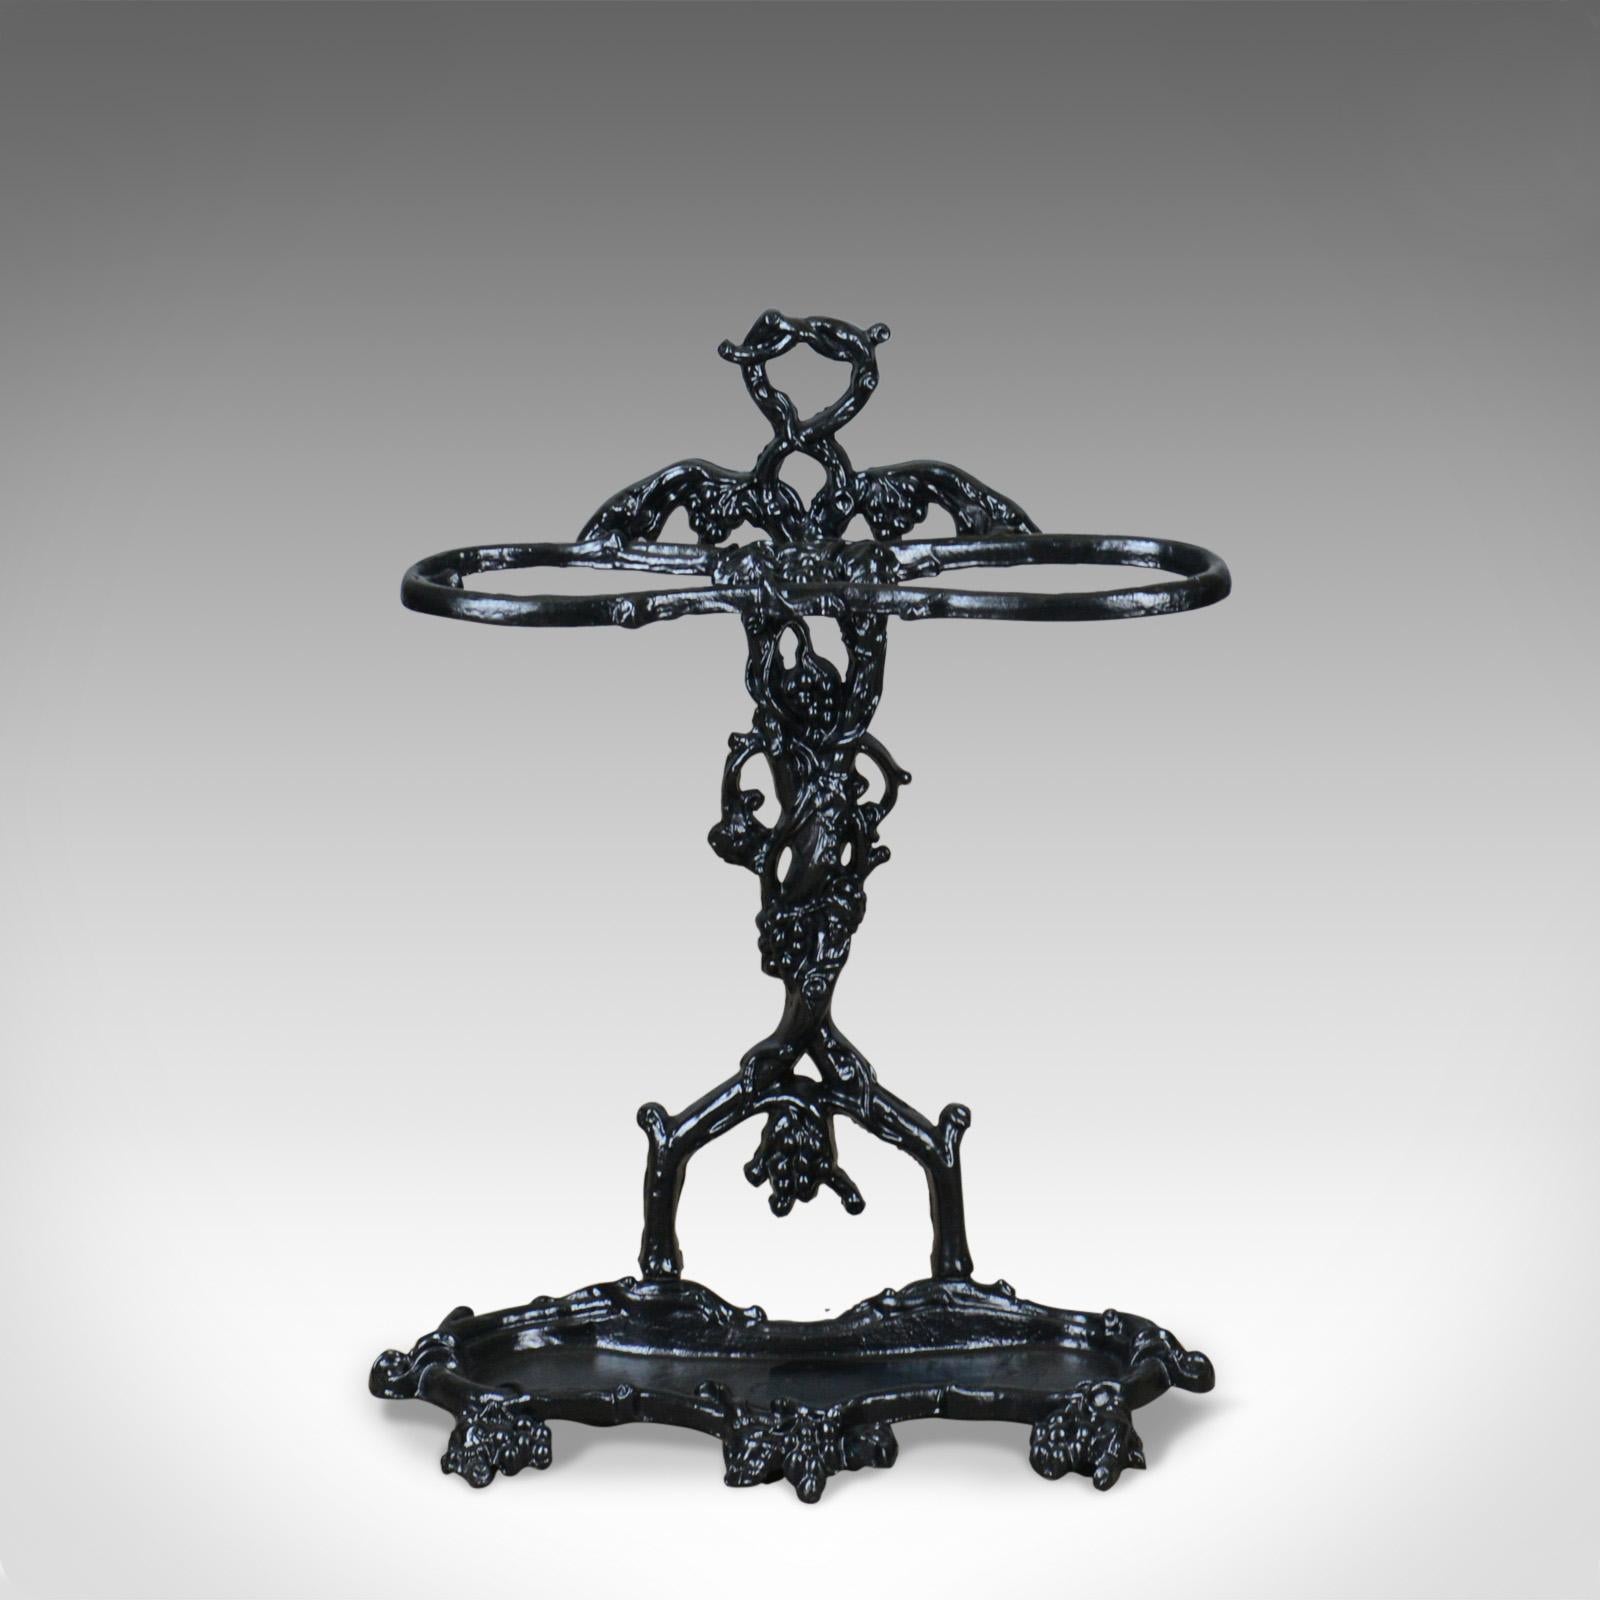 This is a vintage umbrella or stick stand, a painted foundry cast iron, hall stand in the Victorian, Coalbrookdale manner dating to the 20th century.

Attractively cast in heavy iron depicting fruiting vines
Solid and robust suitable for indoor